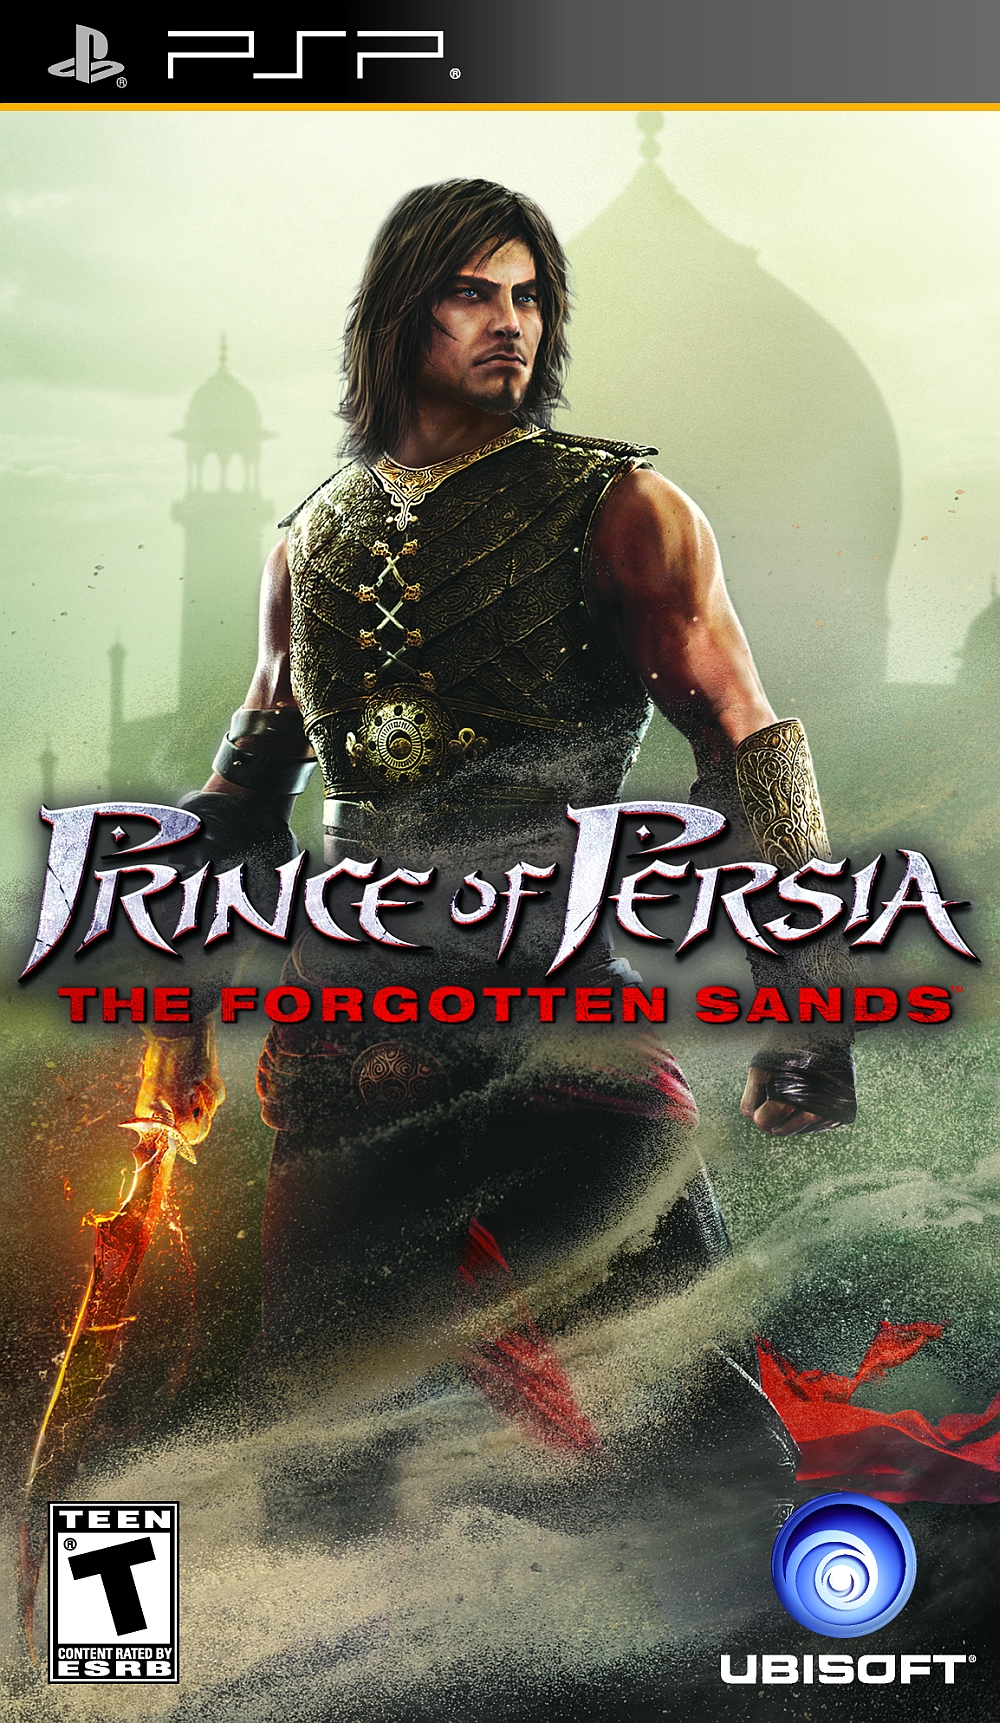 Prince Persia: The Sands (PSP) | of Persia Wiki | Fandom